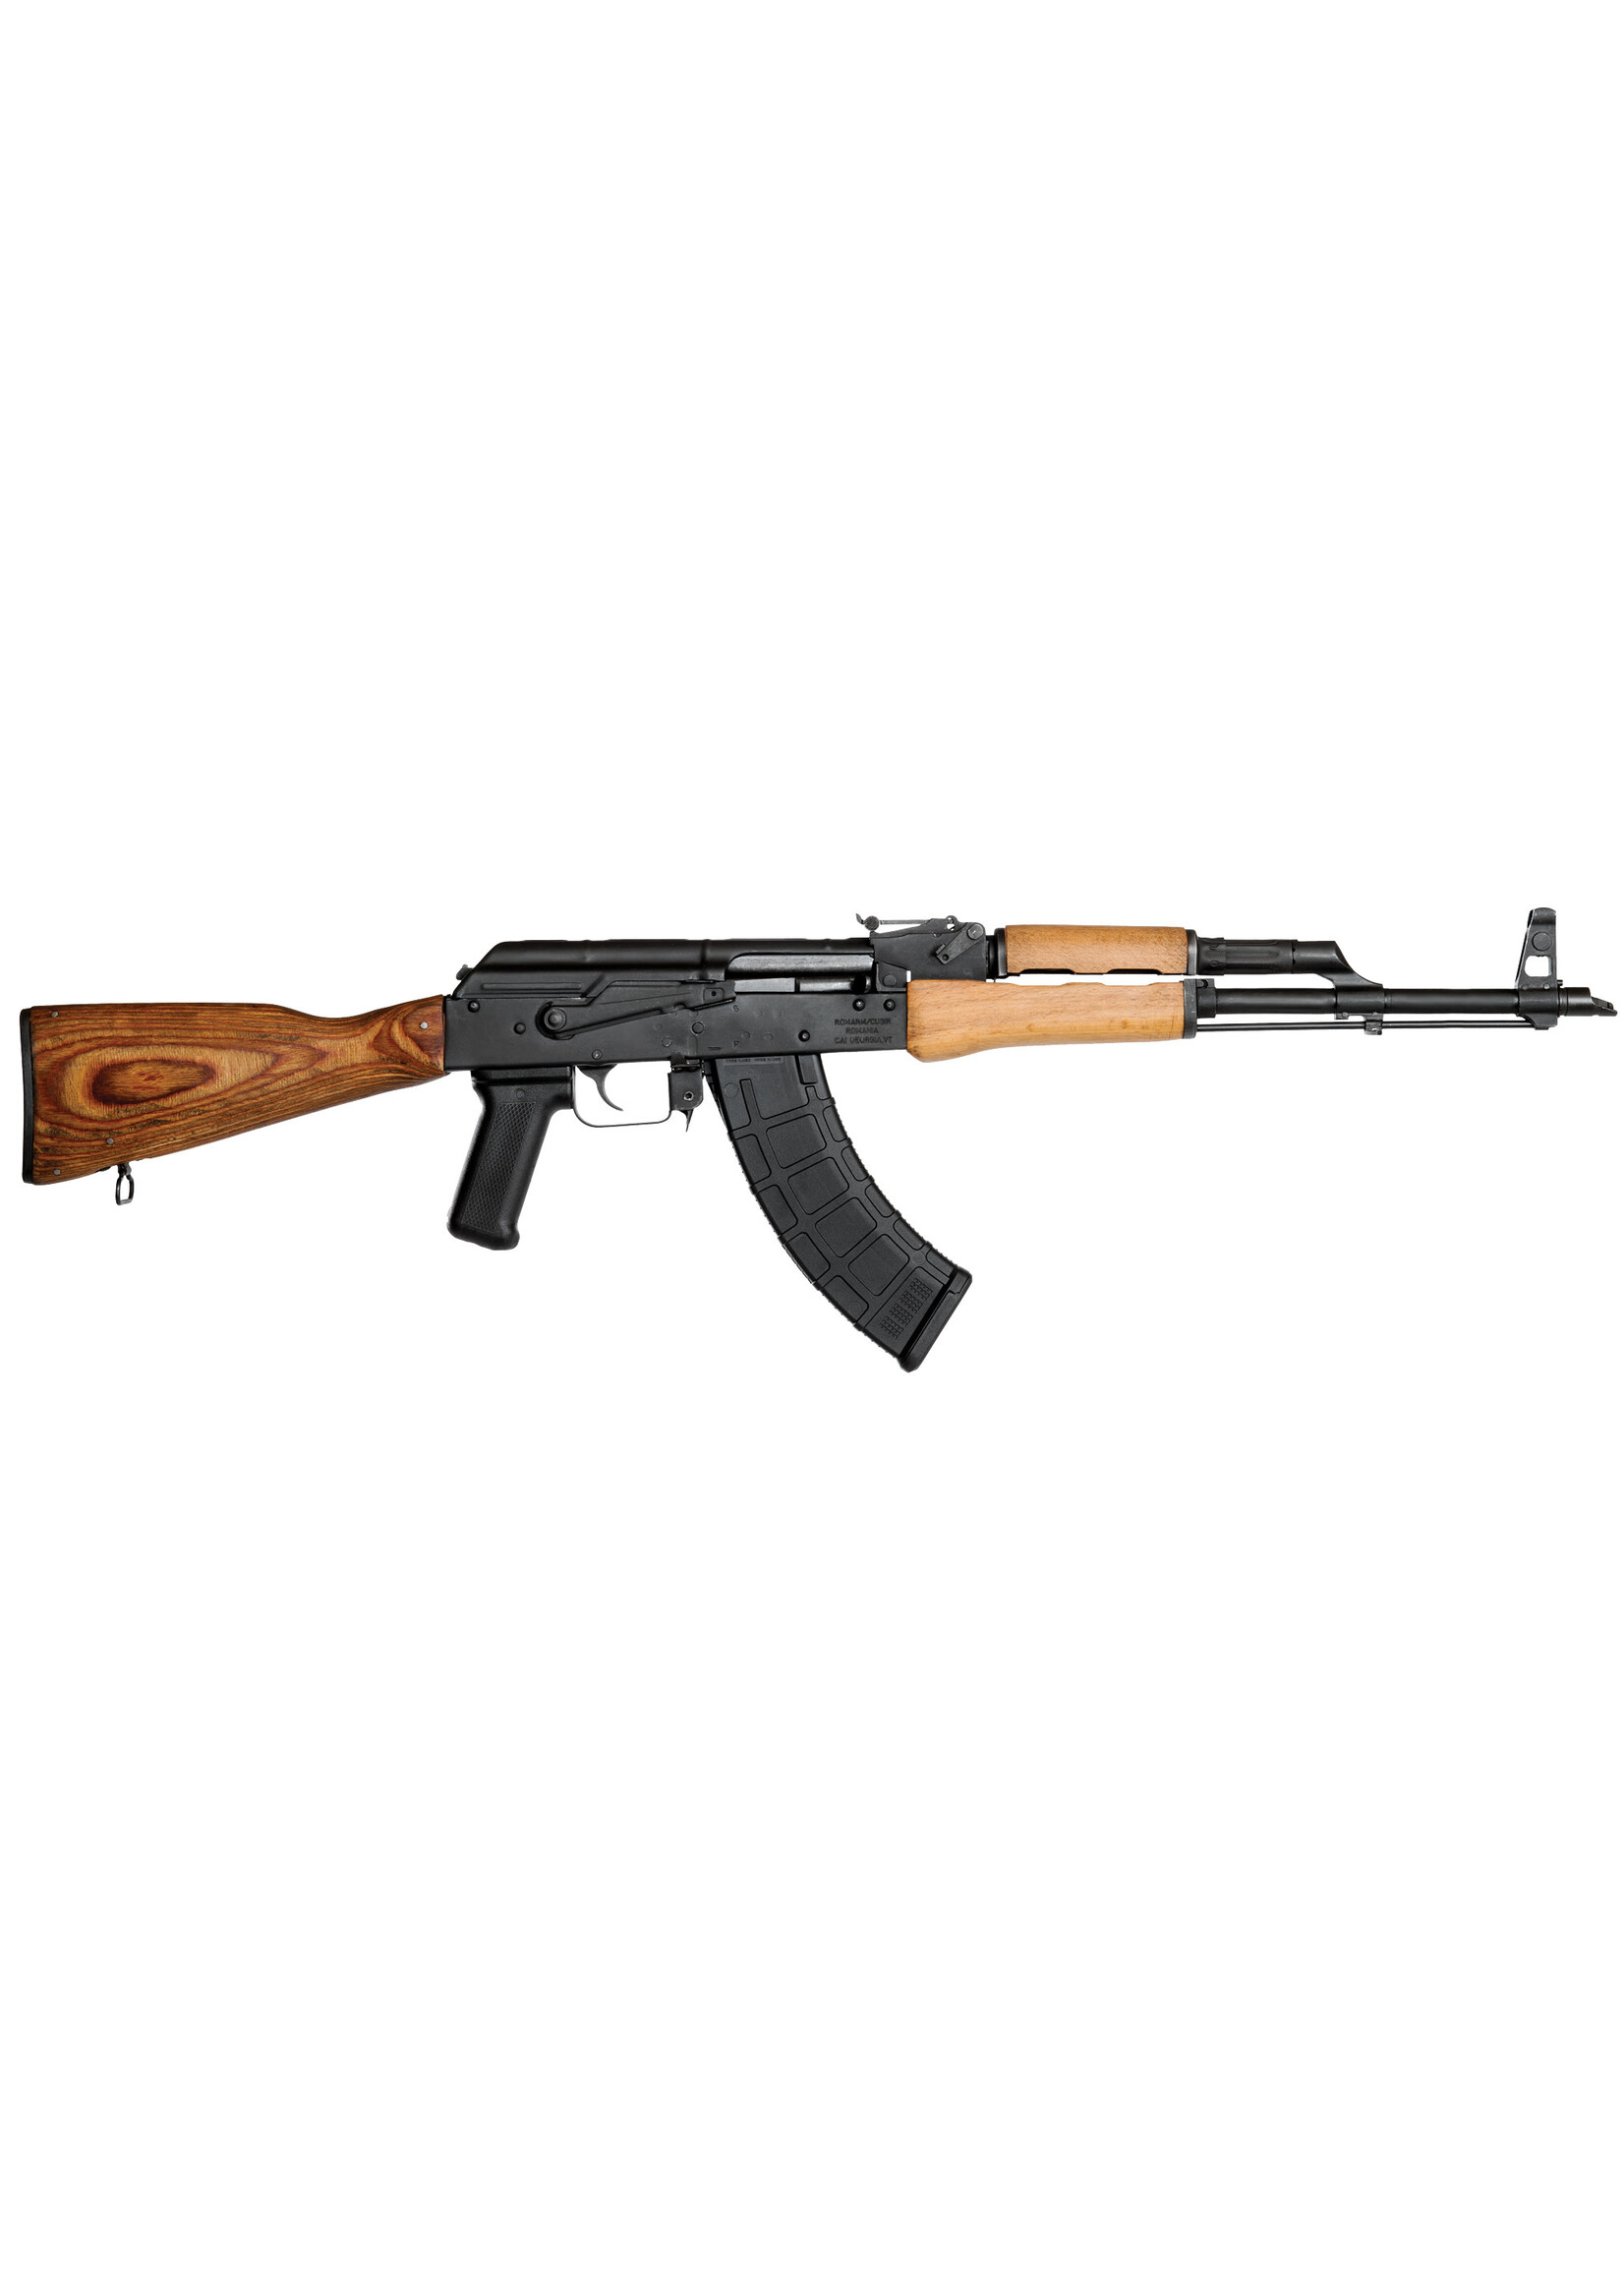 CENTURY ARMS GP/WASR10 7.62X39MM 30RD 16.5"